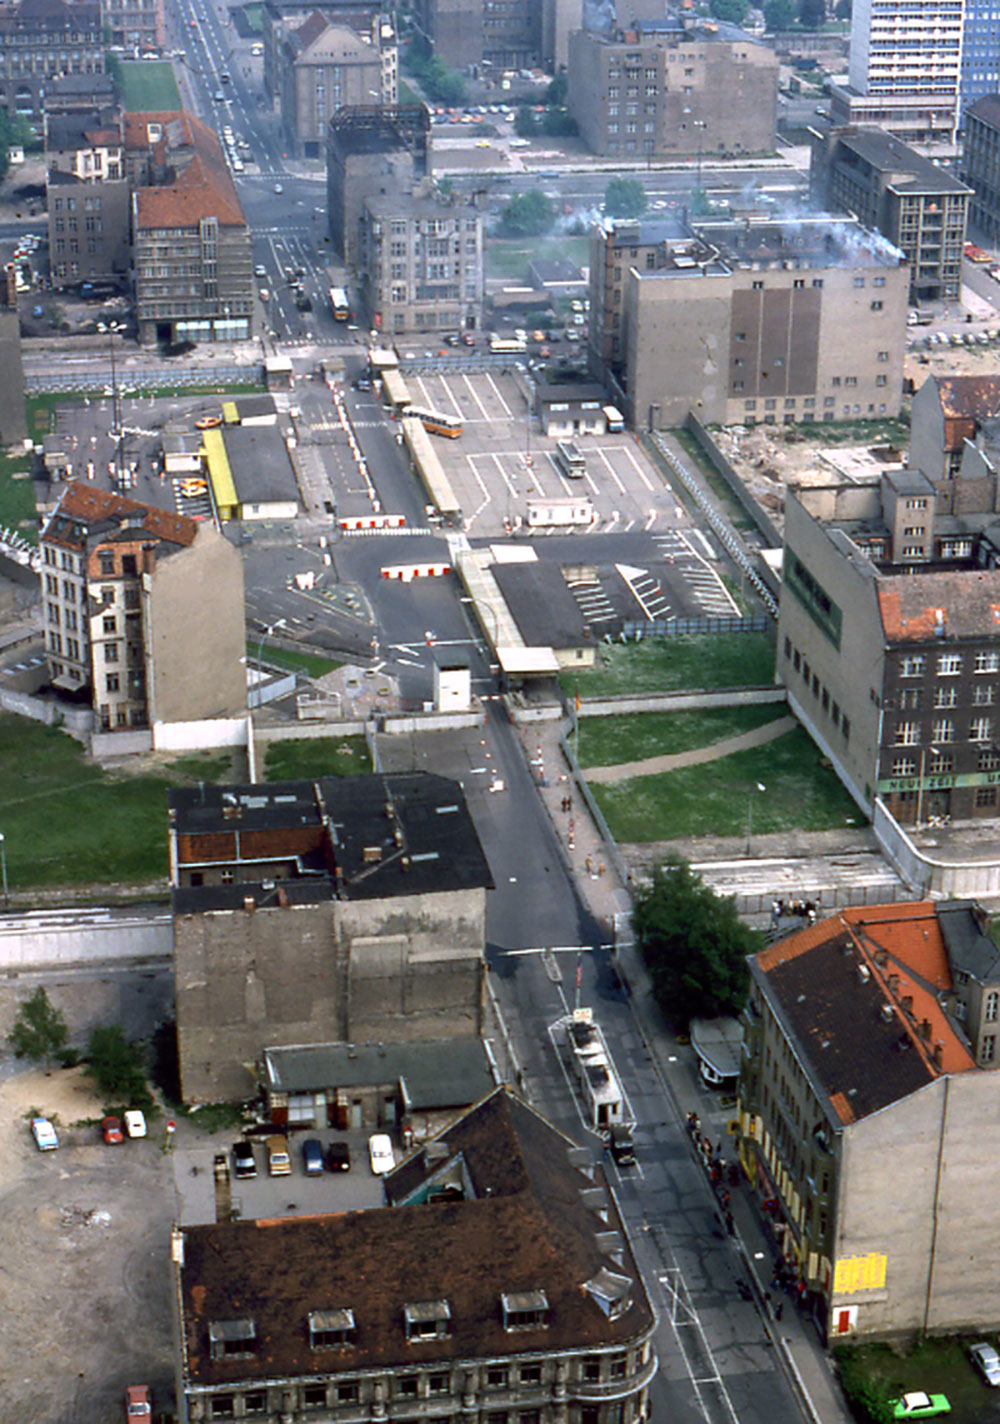 Aerial view of the GDR border crossing point, which extends over five plots of land, with massive concrete barriers in the middle of Friedrichstrasse.